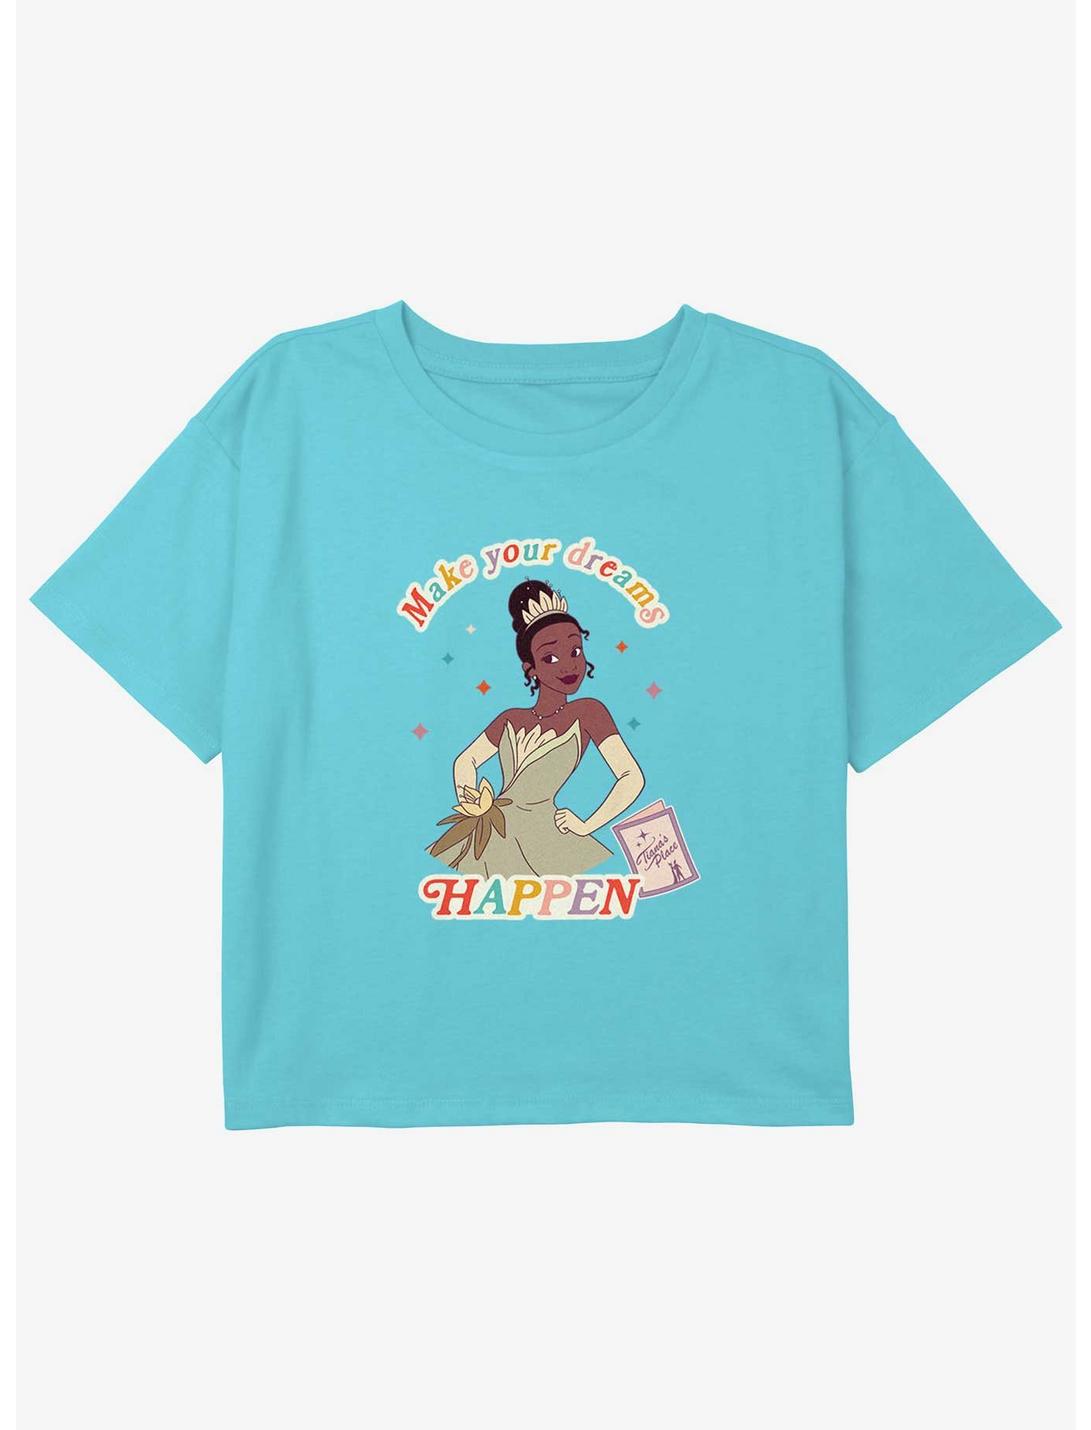 Disney The Princess and the Frog Tiana Make Your Dreams Happen Girls Youth Crop T-Shirt, BLUE, hi-res